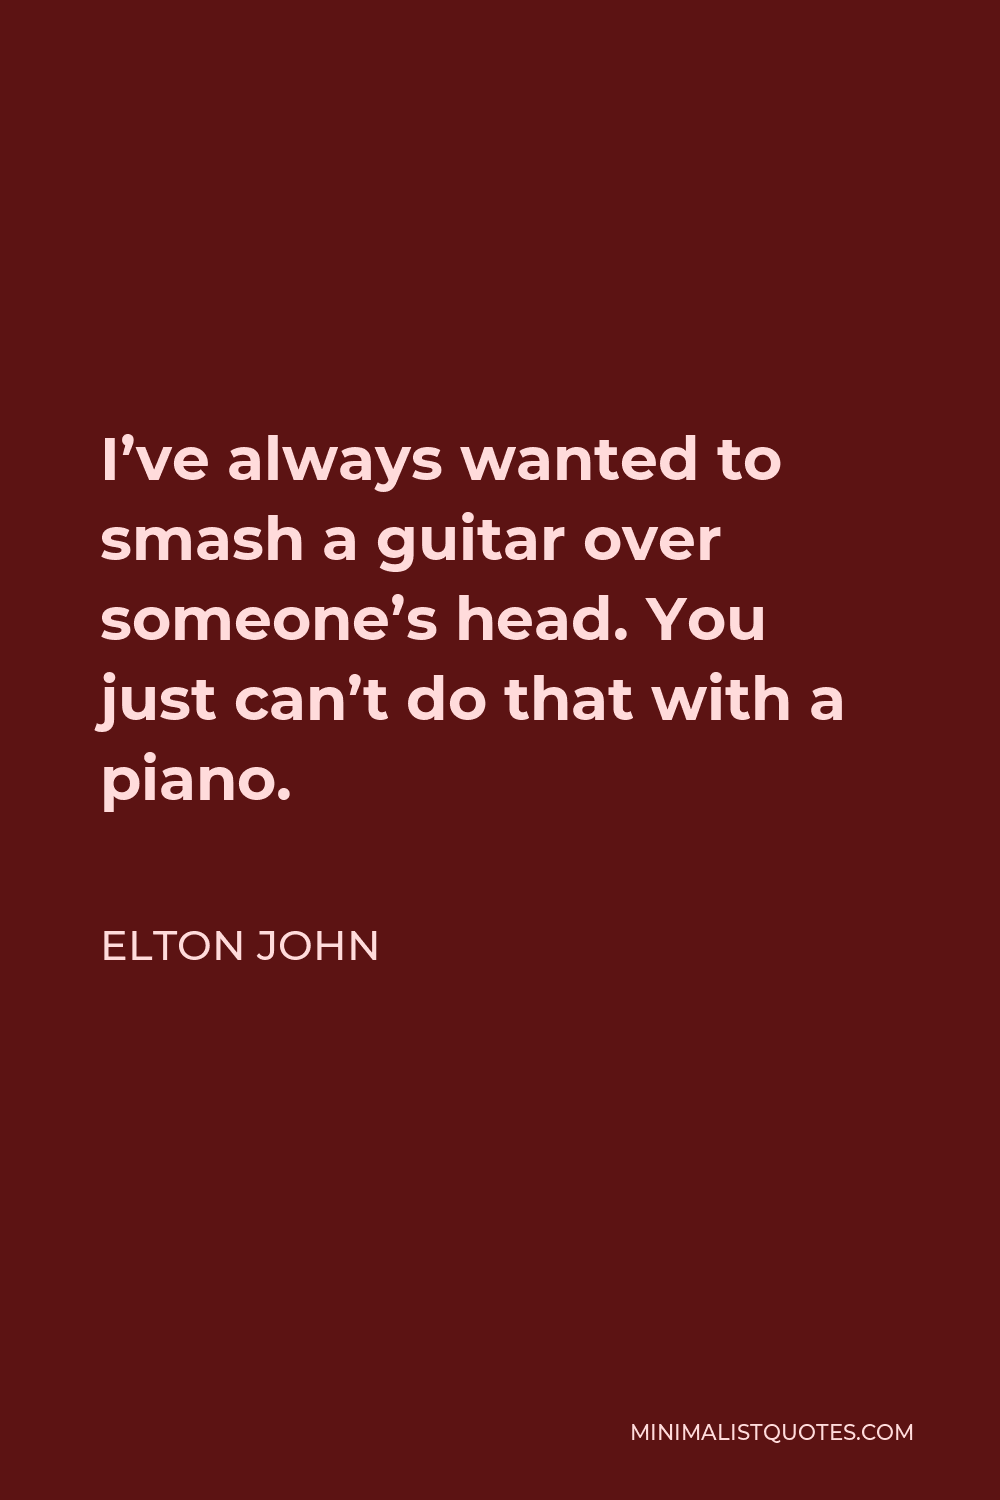 Elton John Quote - I’ve always wanted to smash a guitar over someone’s head. You just can’t do that with a piano.